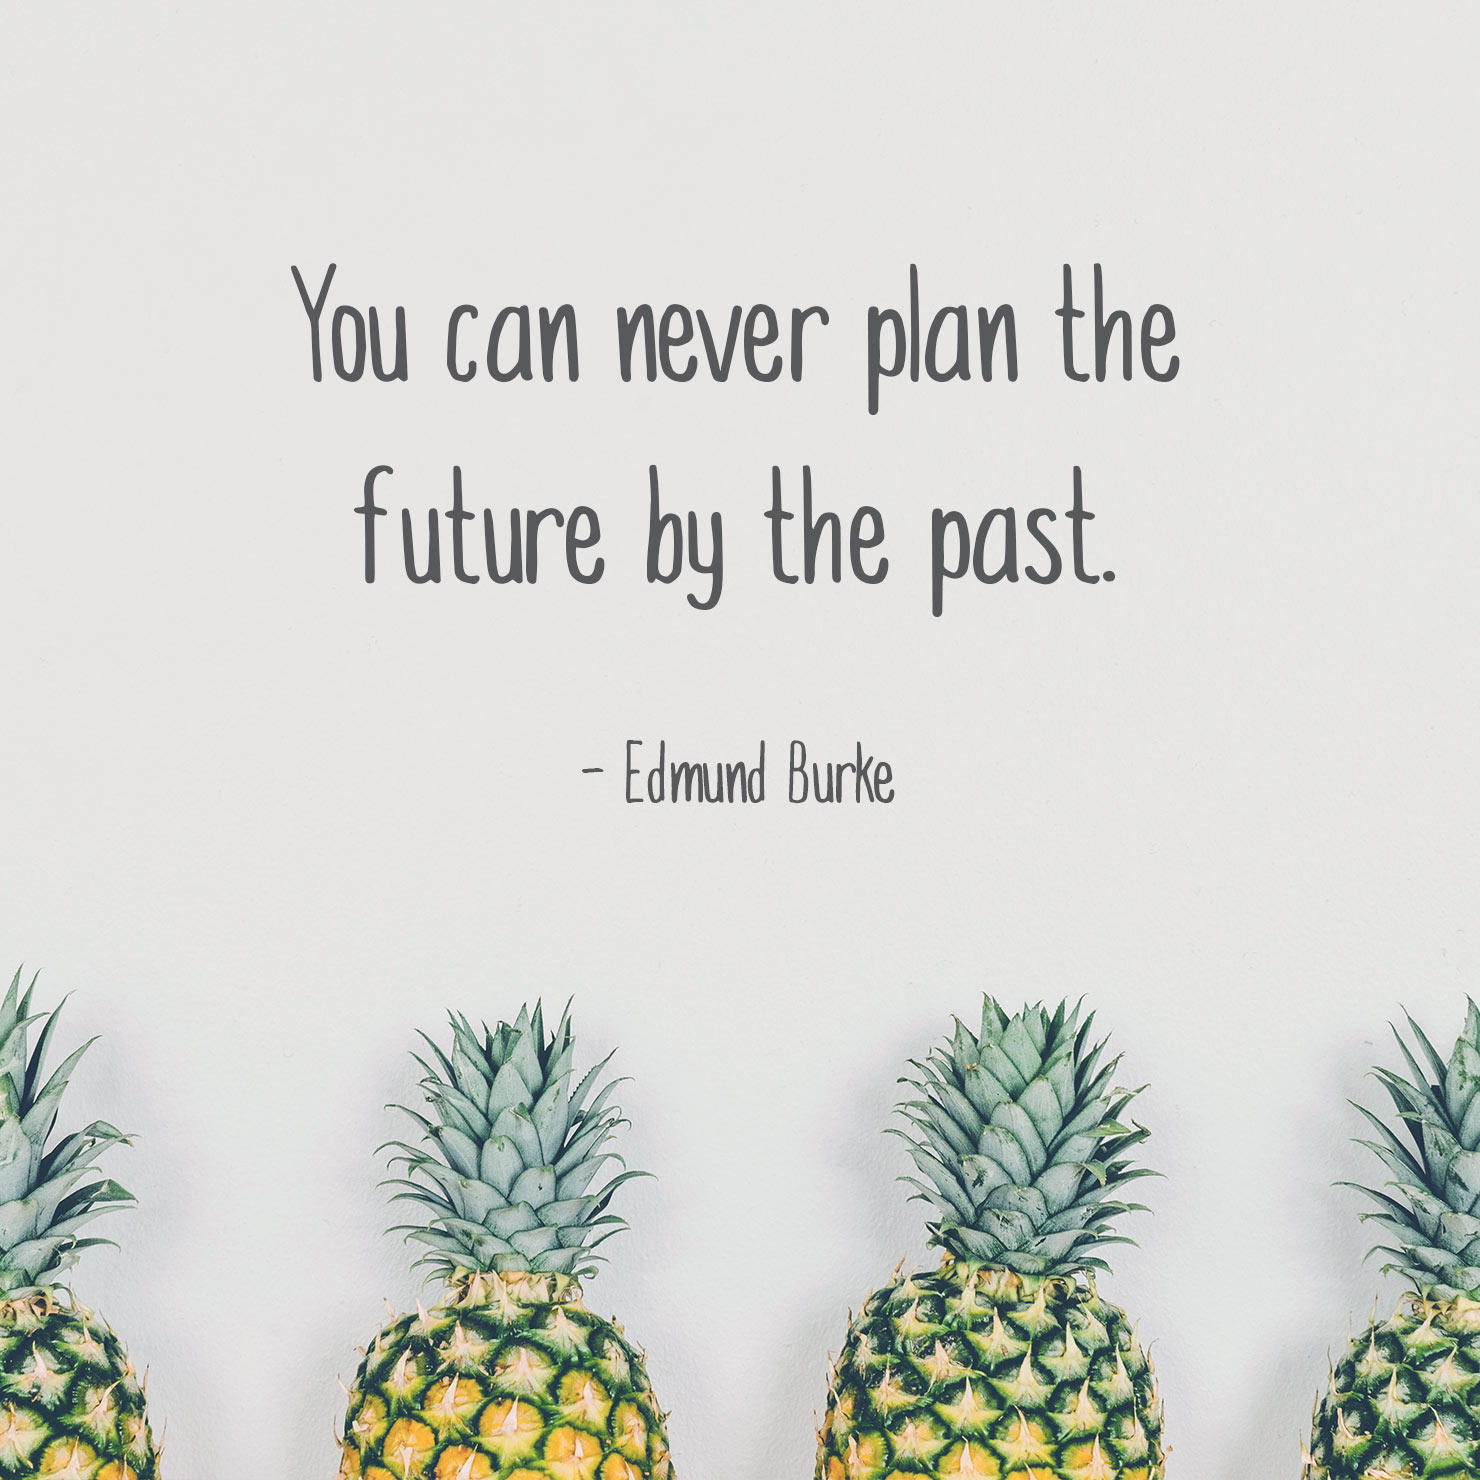 wisdom graduation quote: you can never plan the future by the past - Edmund Burke